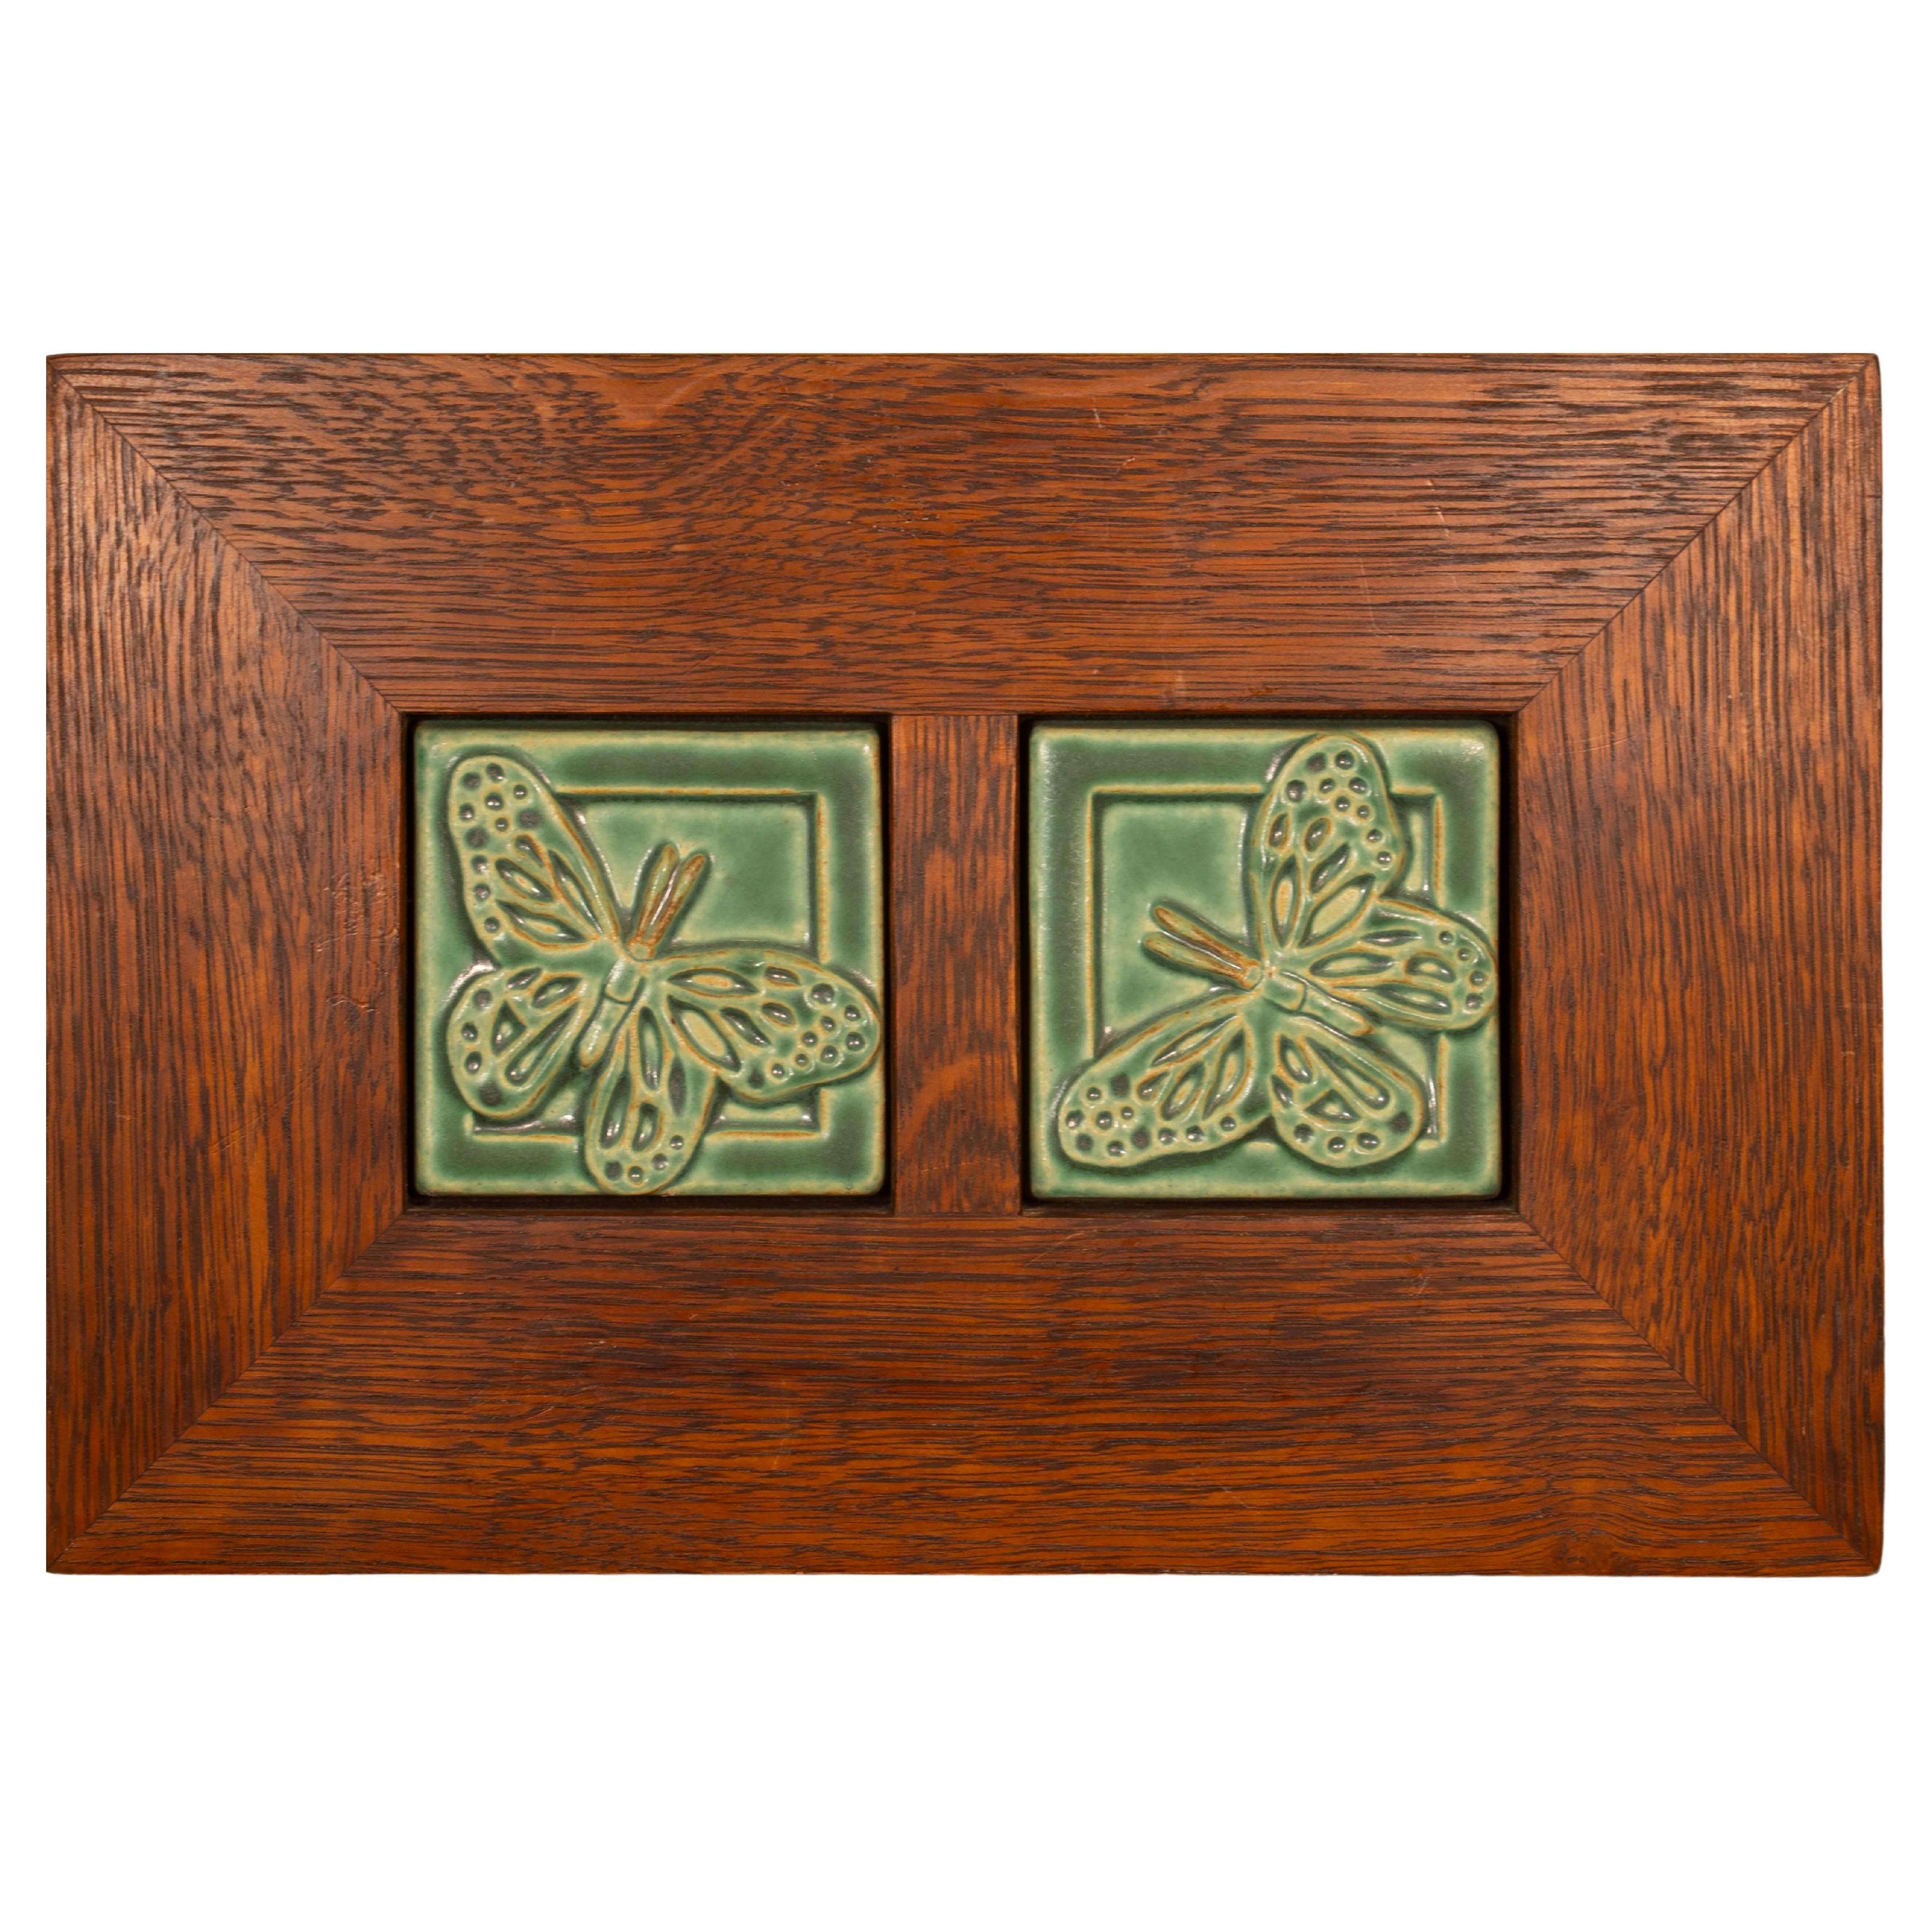 Framed Double Pewabic Butterfly Tiles Mid Century Modern Stamped For Sale